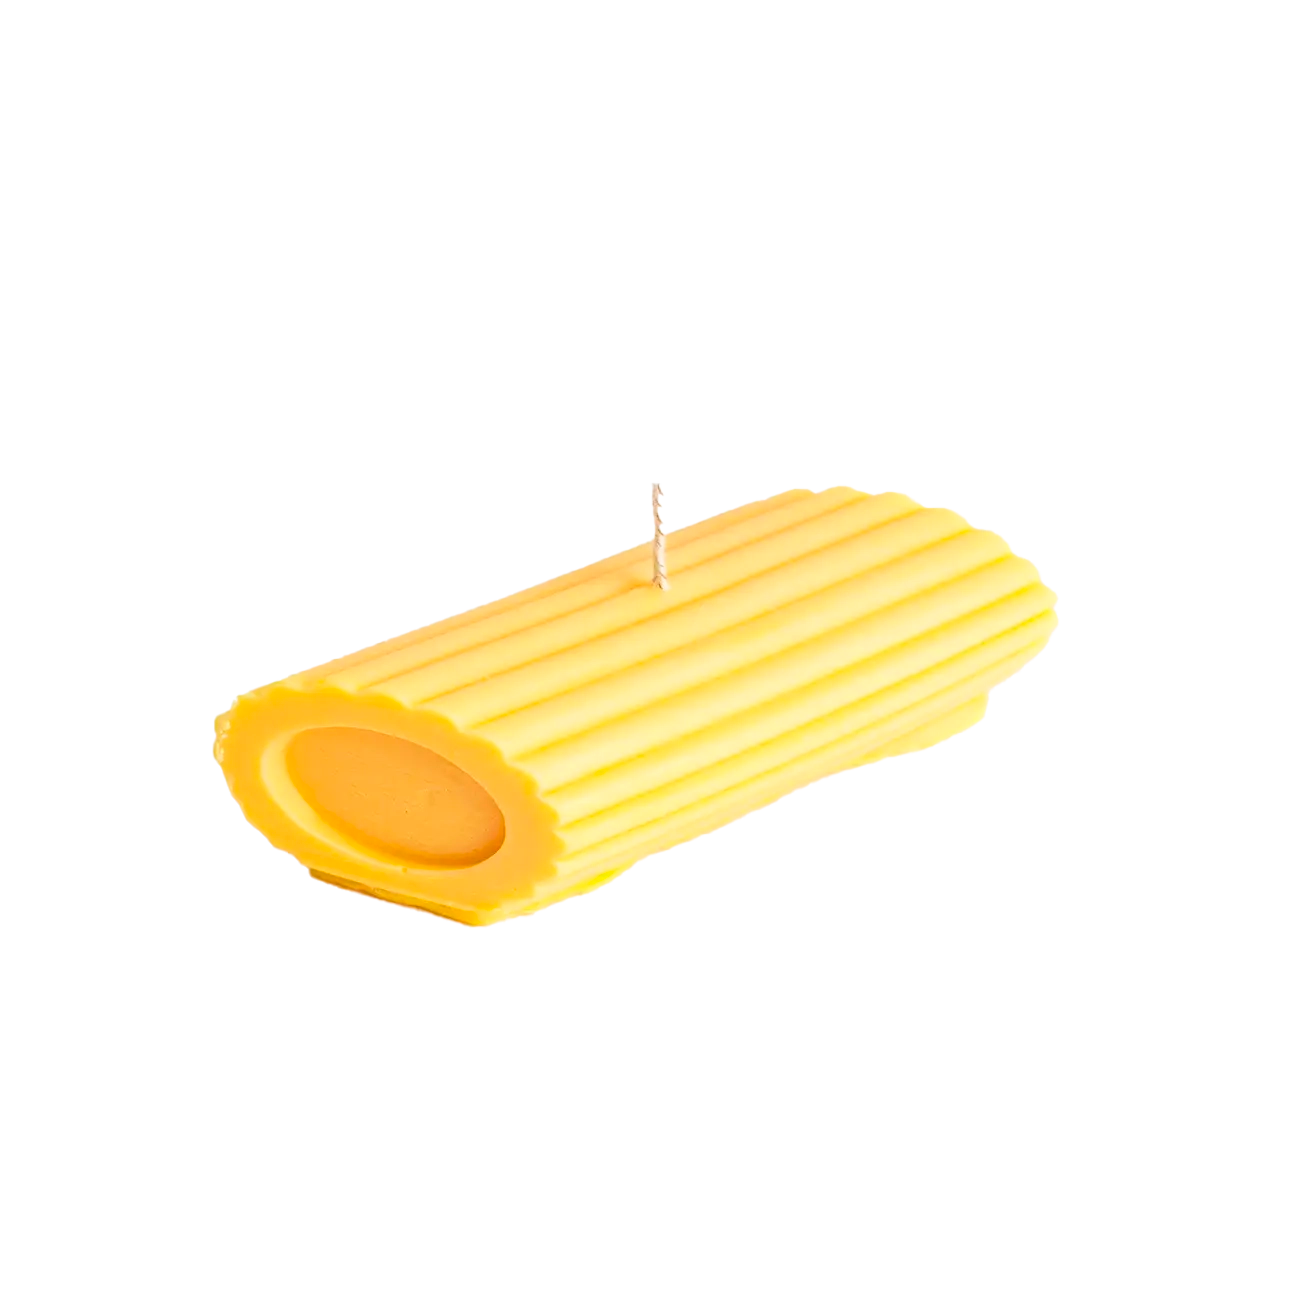 Penne Candle